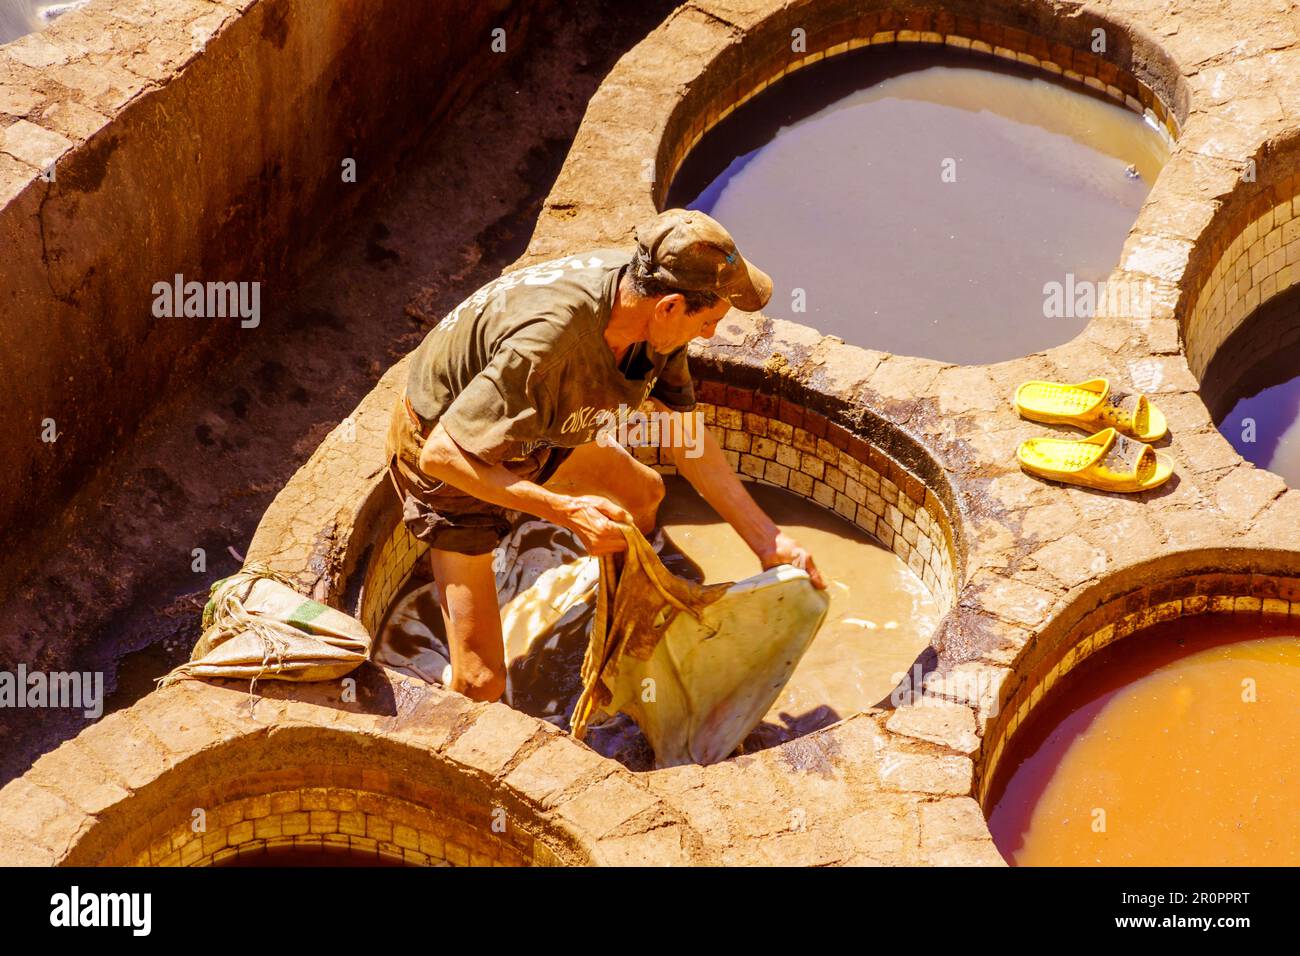 Fes, Morocco - March 31, 2023: Scene of the leather tannery, with workers and stone vats filled with various colors. Fes, Morocco Stock Photo